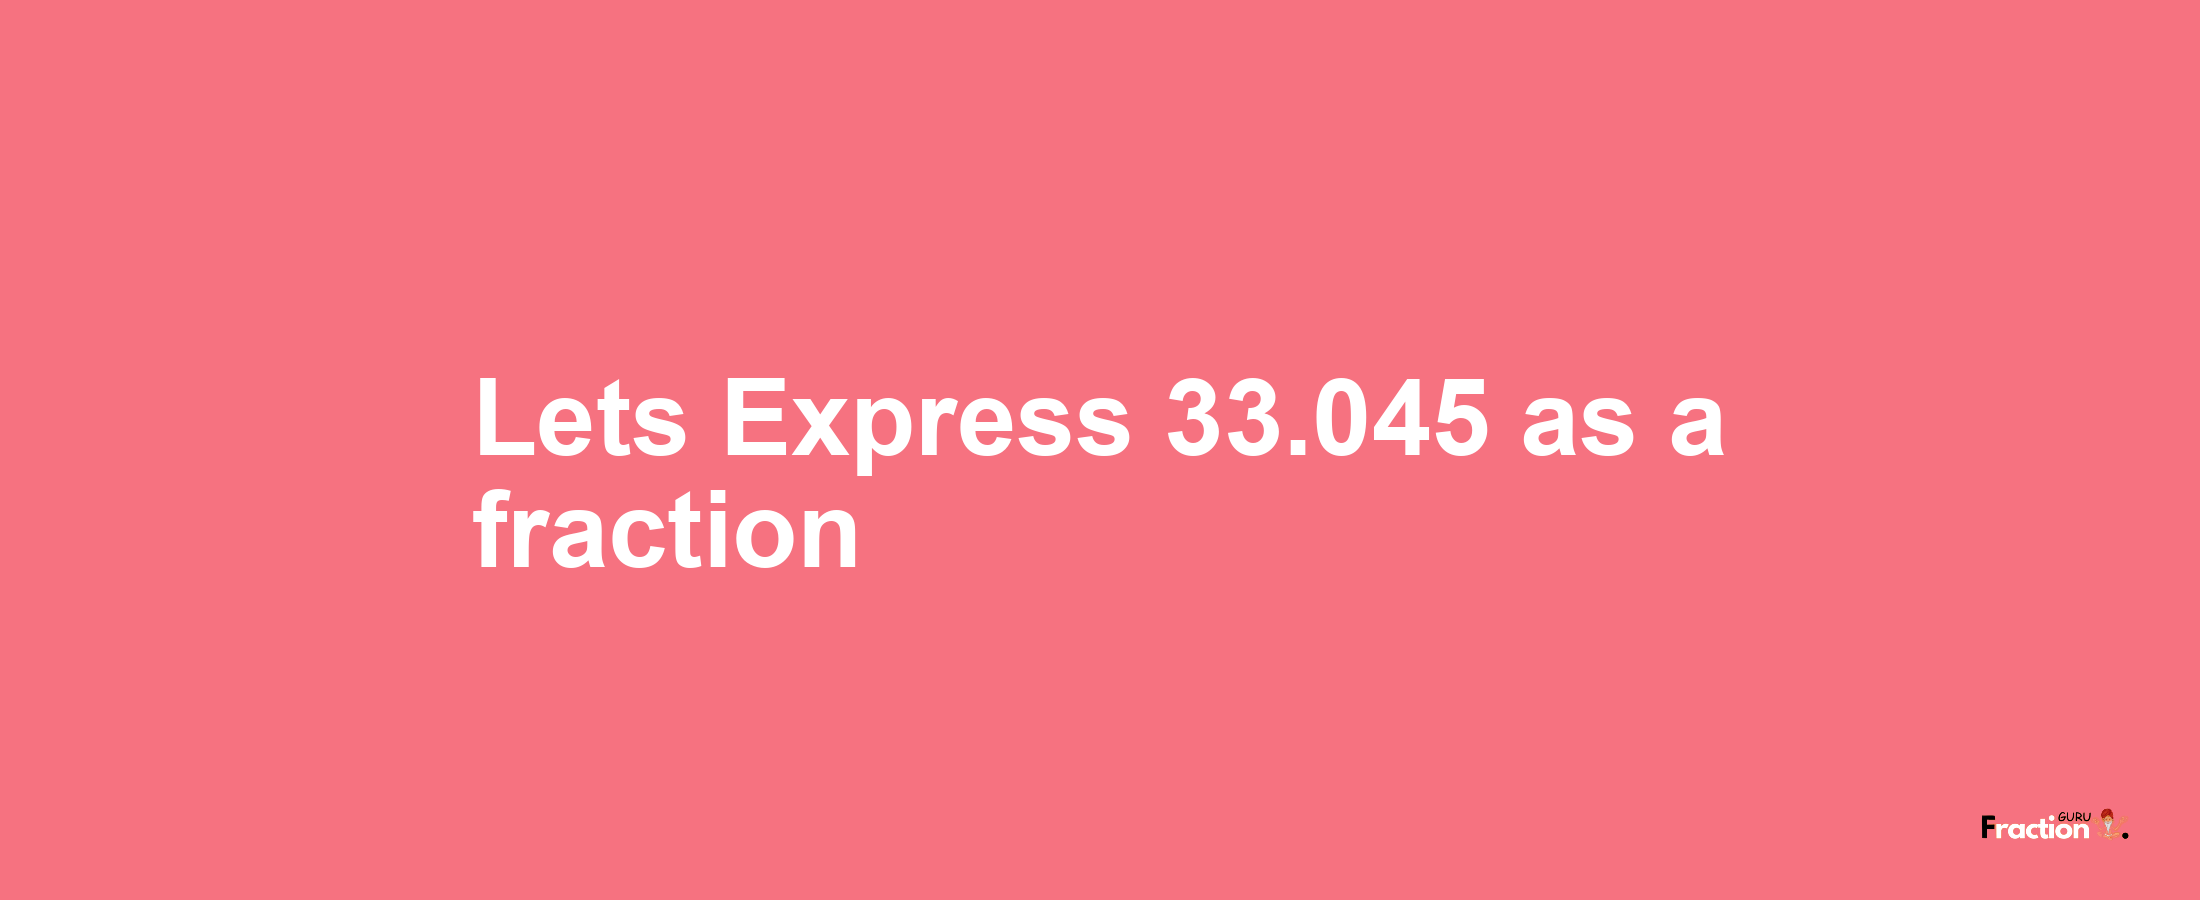 Lets Express 33.045 as afraction